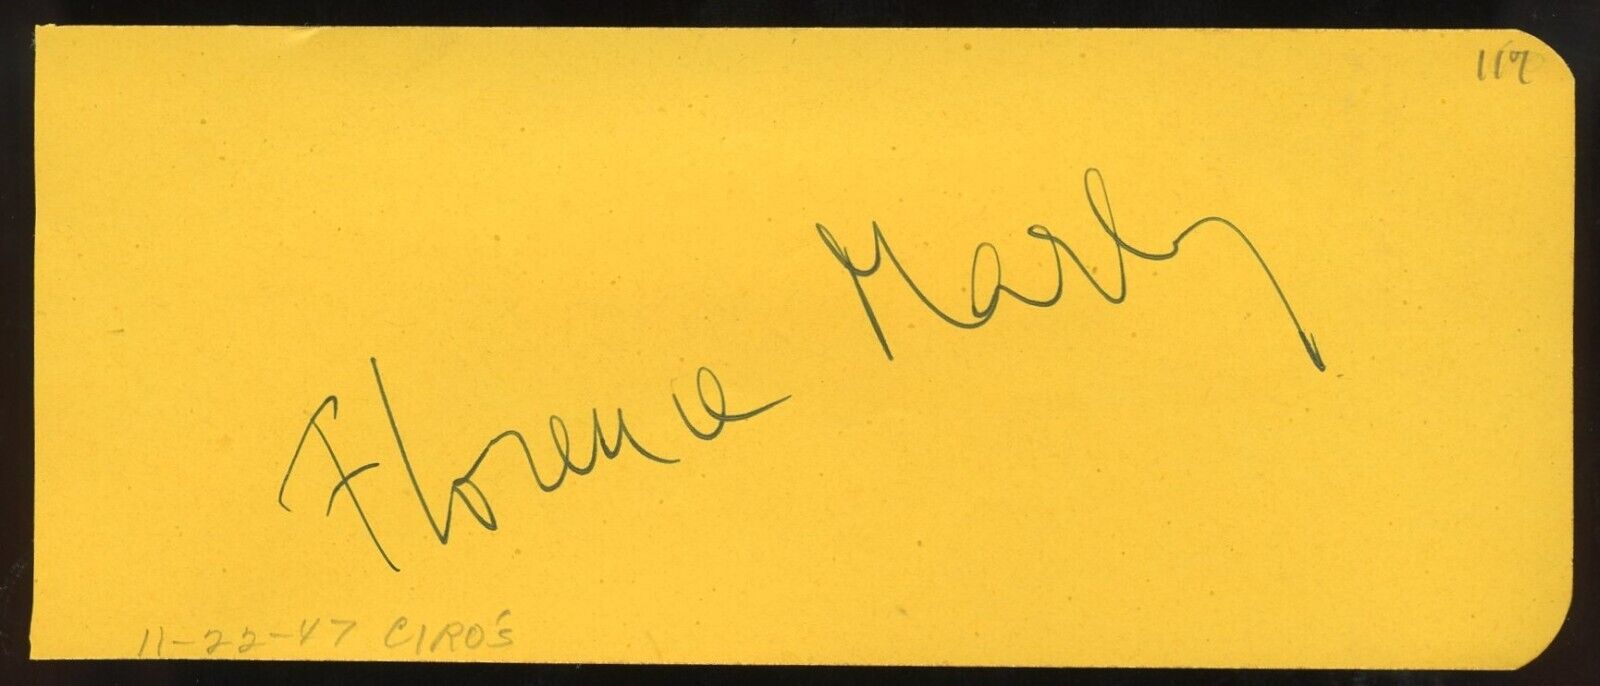 Florence Marly d1978 signed 2x5 autograph on 11-22-47 at Ciro's Night Club LA